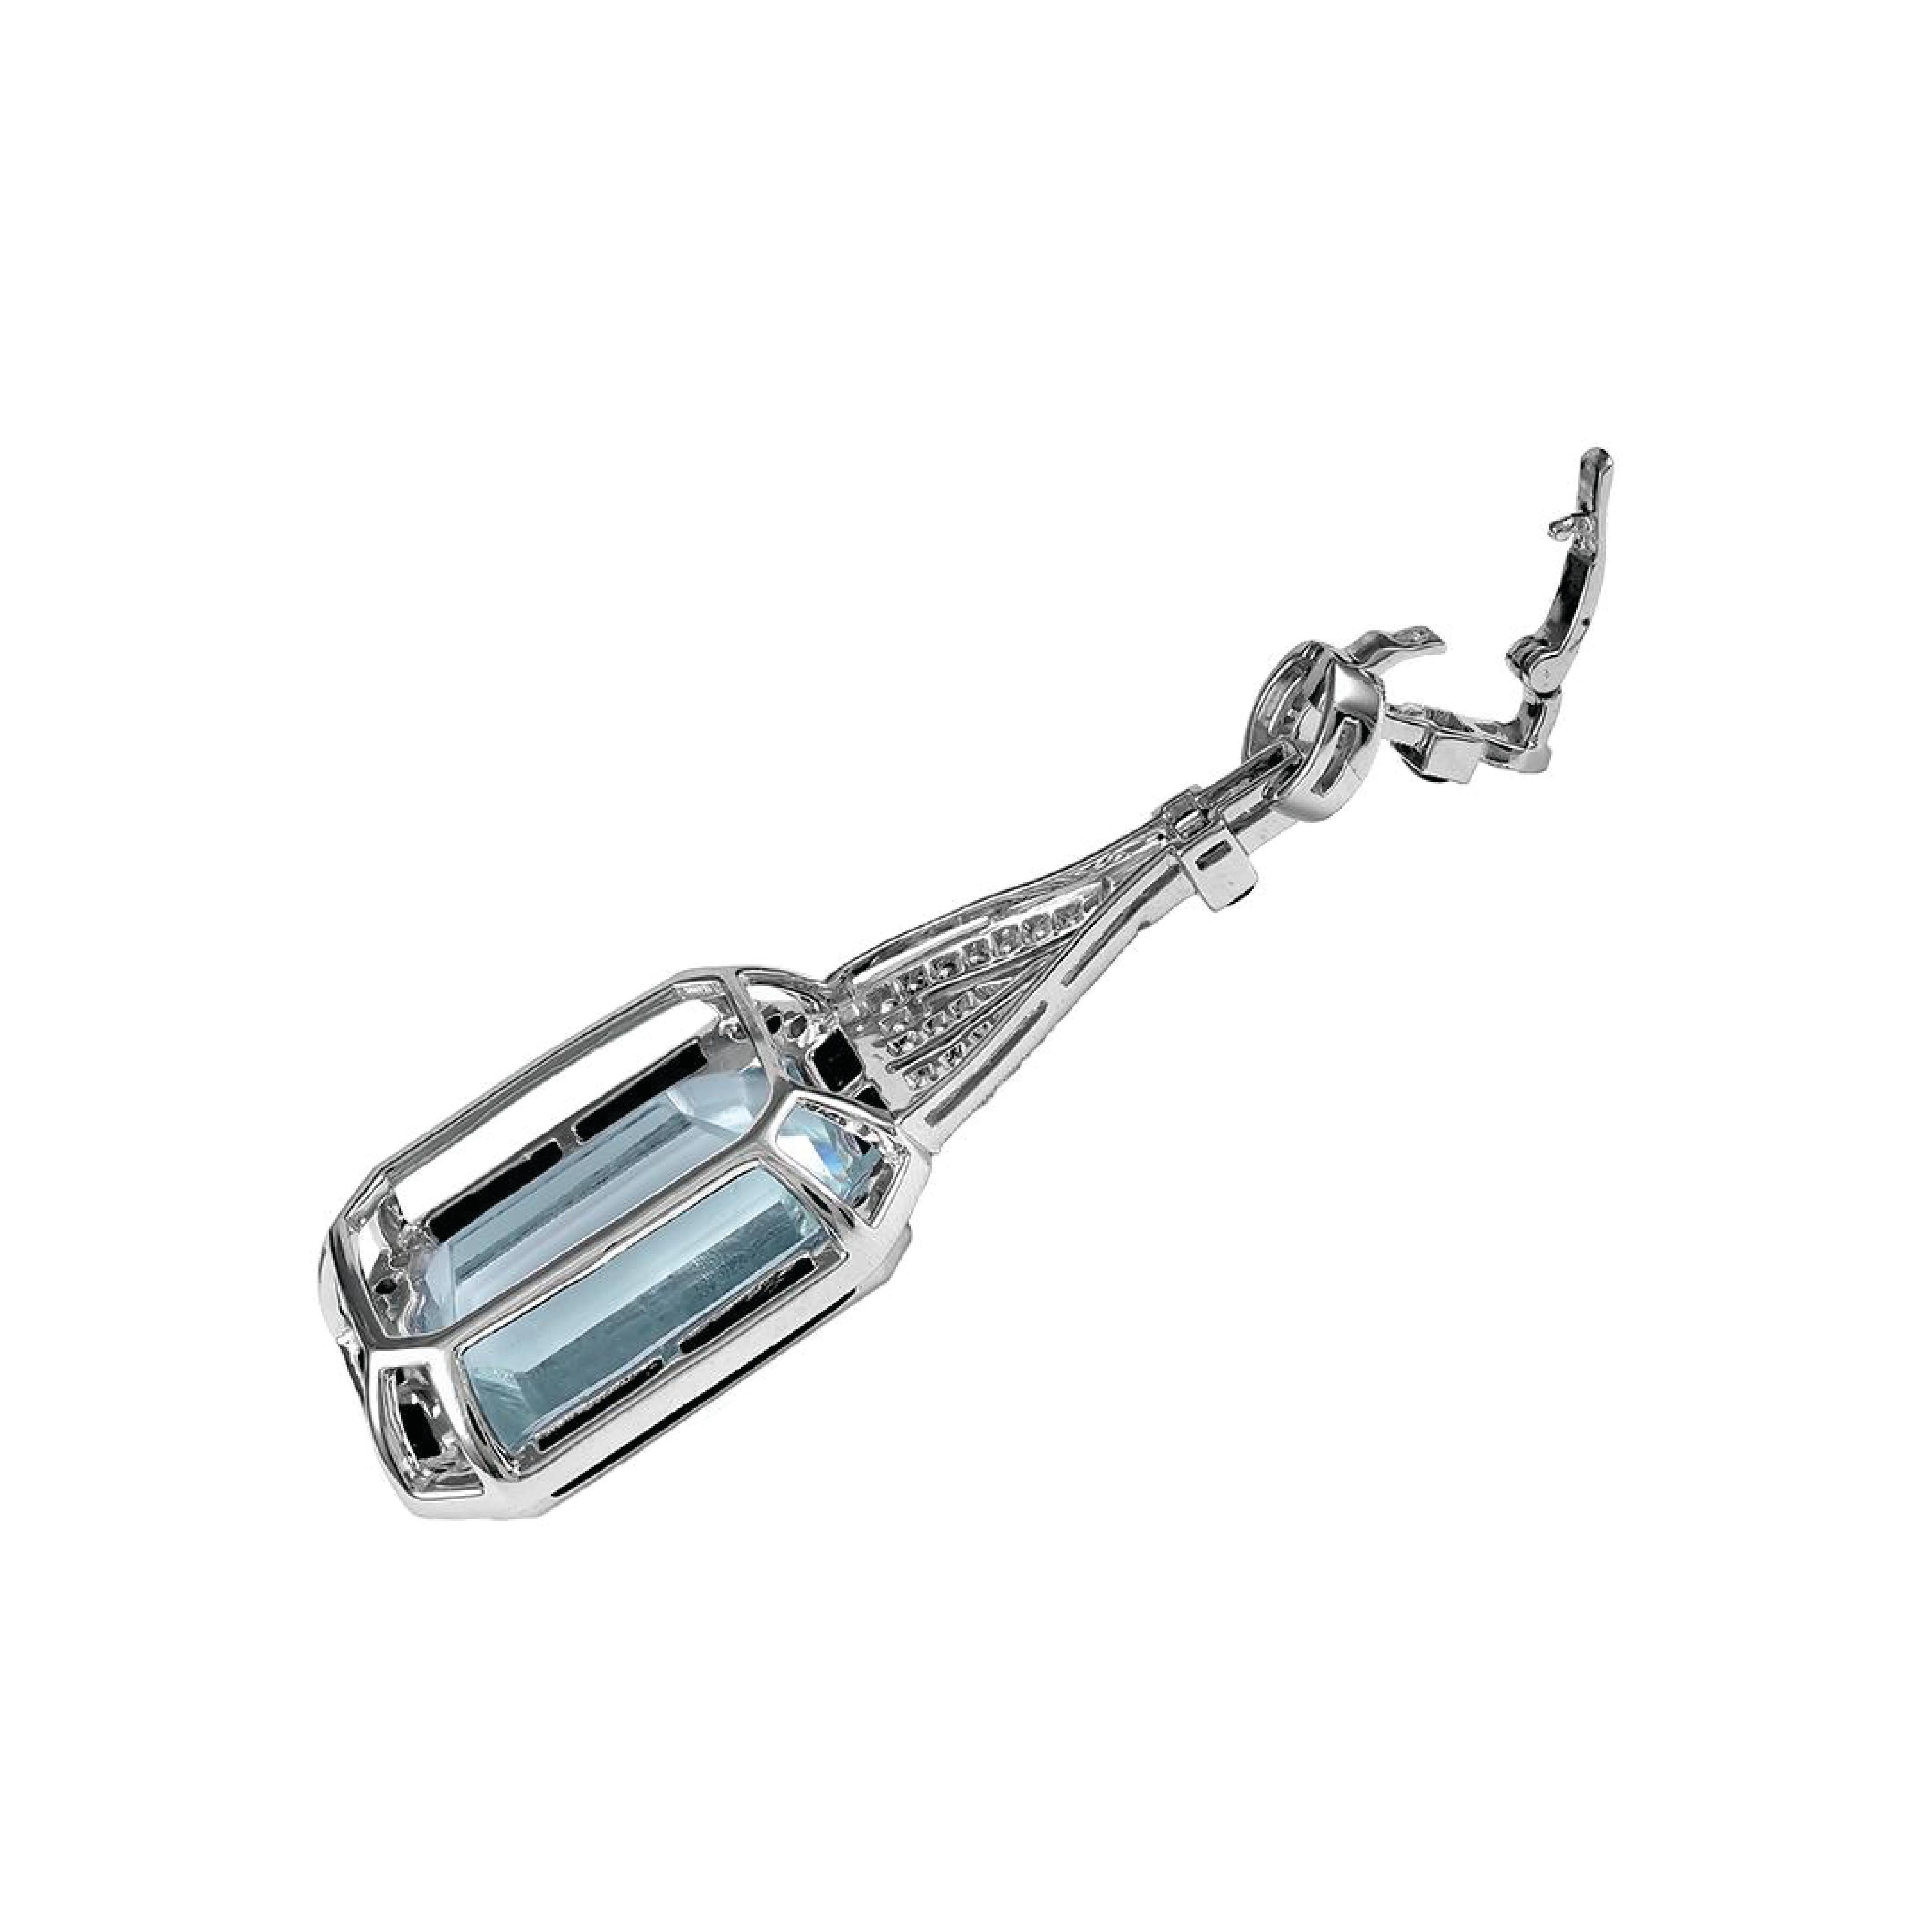 Sophia D Aquamarine Center Pendant weighing 30.48 carats with Diamonds weighing 0.70 carats set in platinum.

Sophia D by Joseph Dardashti LTD has been known worldwide for 35 years and are inspired by classic Art Deco design that merges with modern